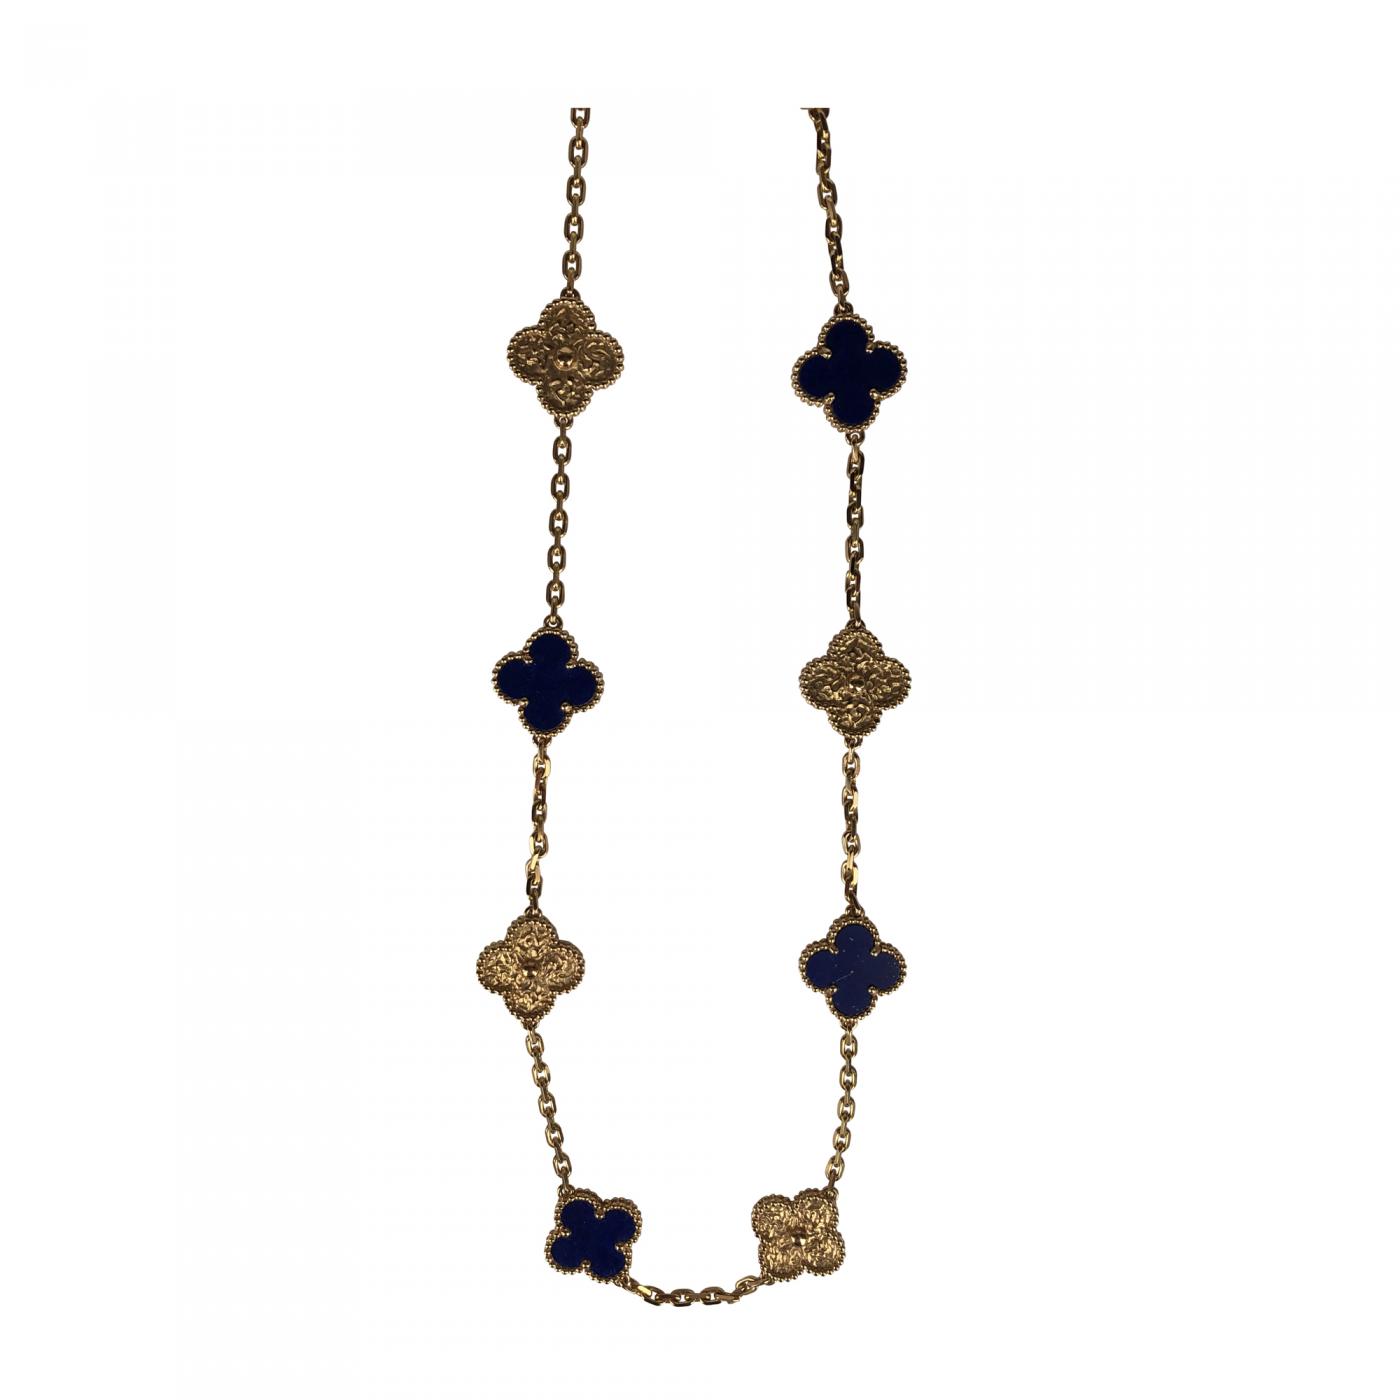 Van Cleef & limited edition Alhambra necklace